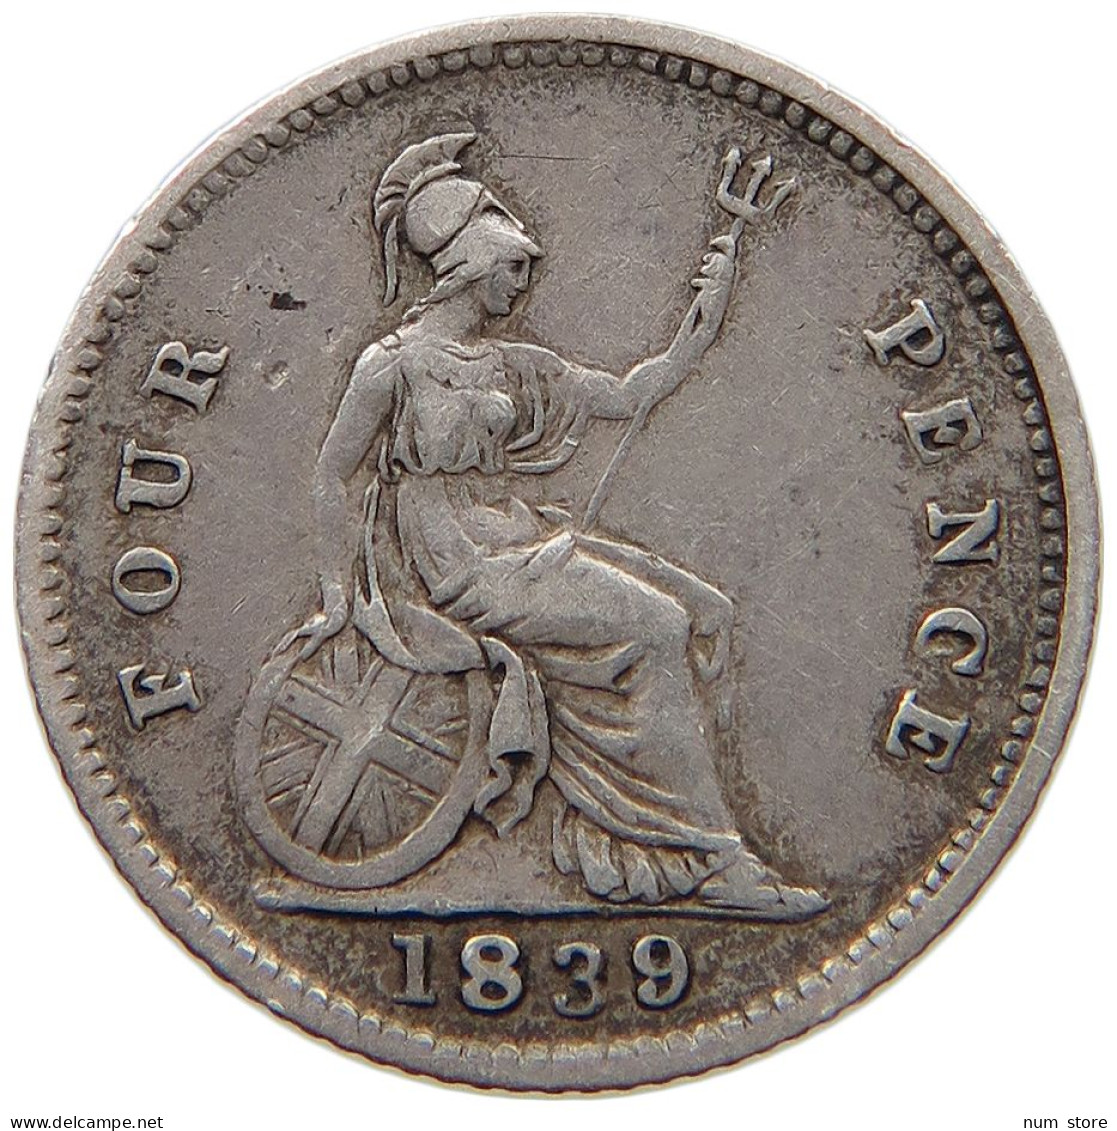 GREAT BRITAIN FOURPENCE 1839 Victoria 1837-1901 #t082 0055 - G. 4 Pence/ Groat